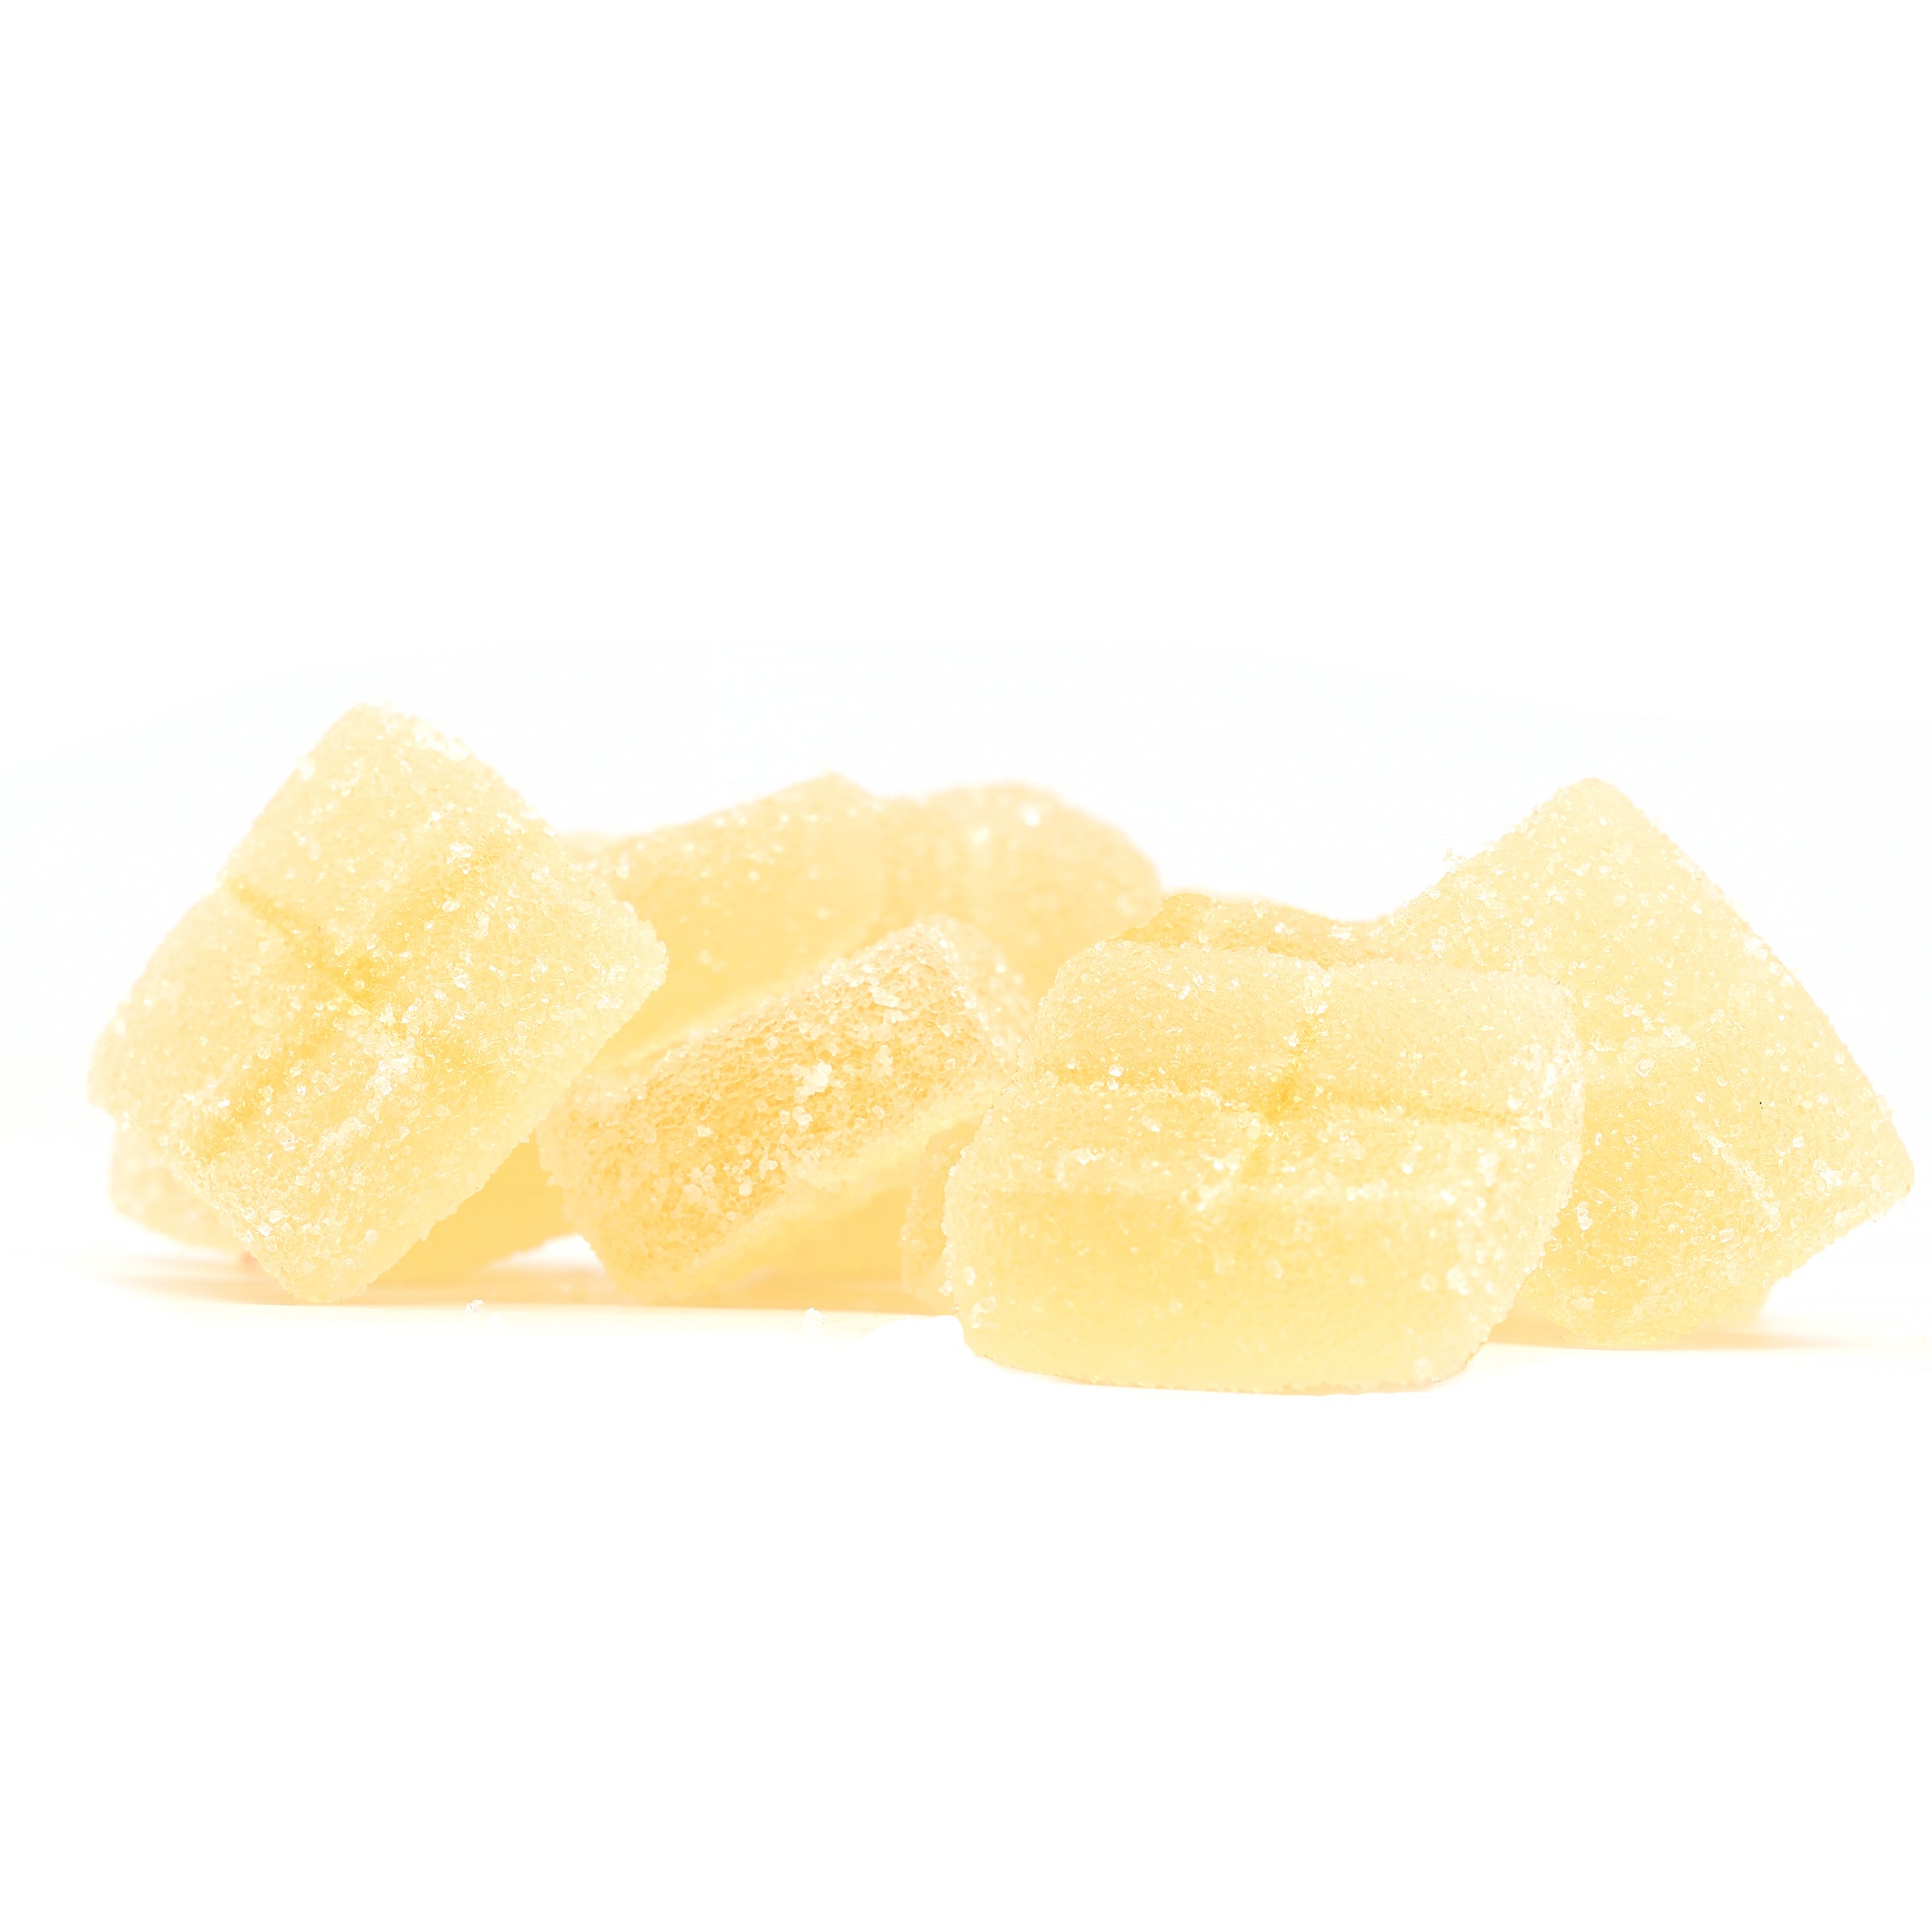 Watermelon Delta-9 THC Gummies: 10 Pack from Botany Farms